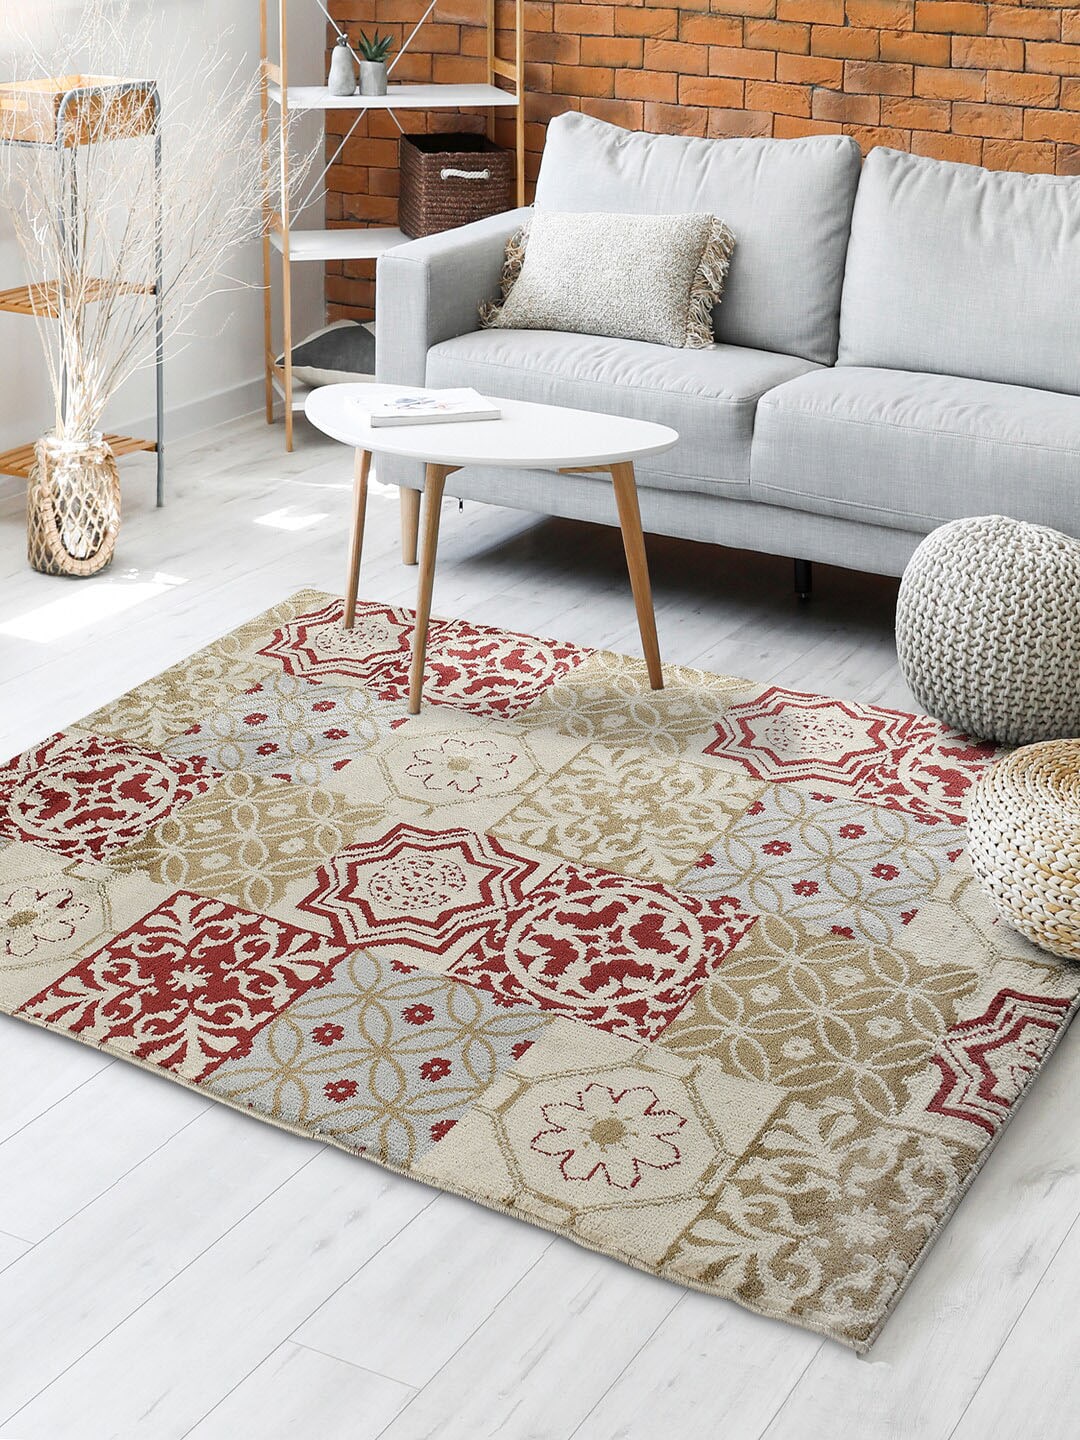 Saral Home Beige Printed Cotton Carpet Price in India